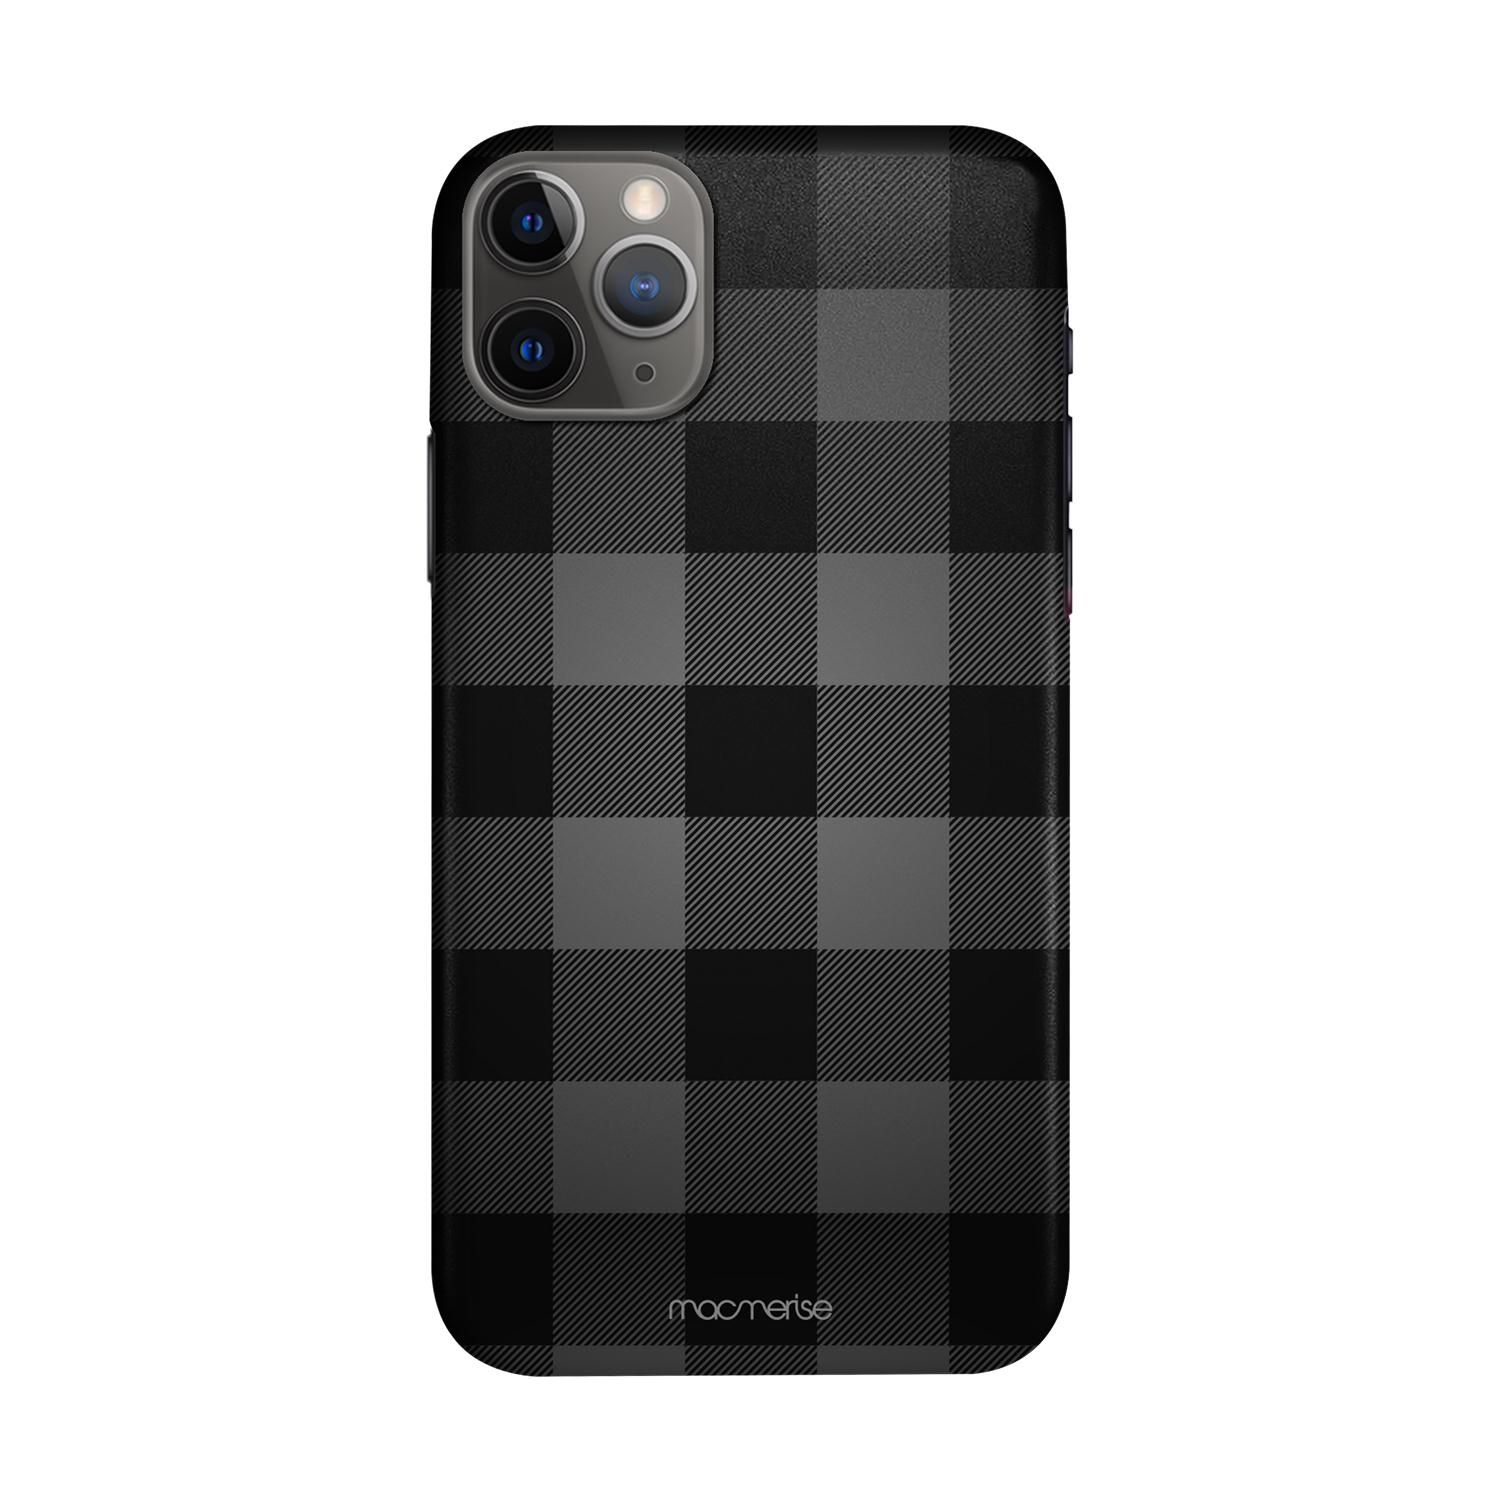 Buy Checkmate Black - Sleek Phone Case for iPhone 11 Pro Max Online